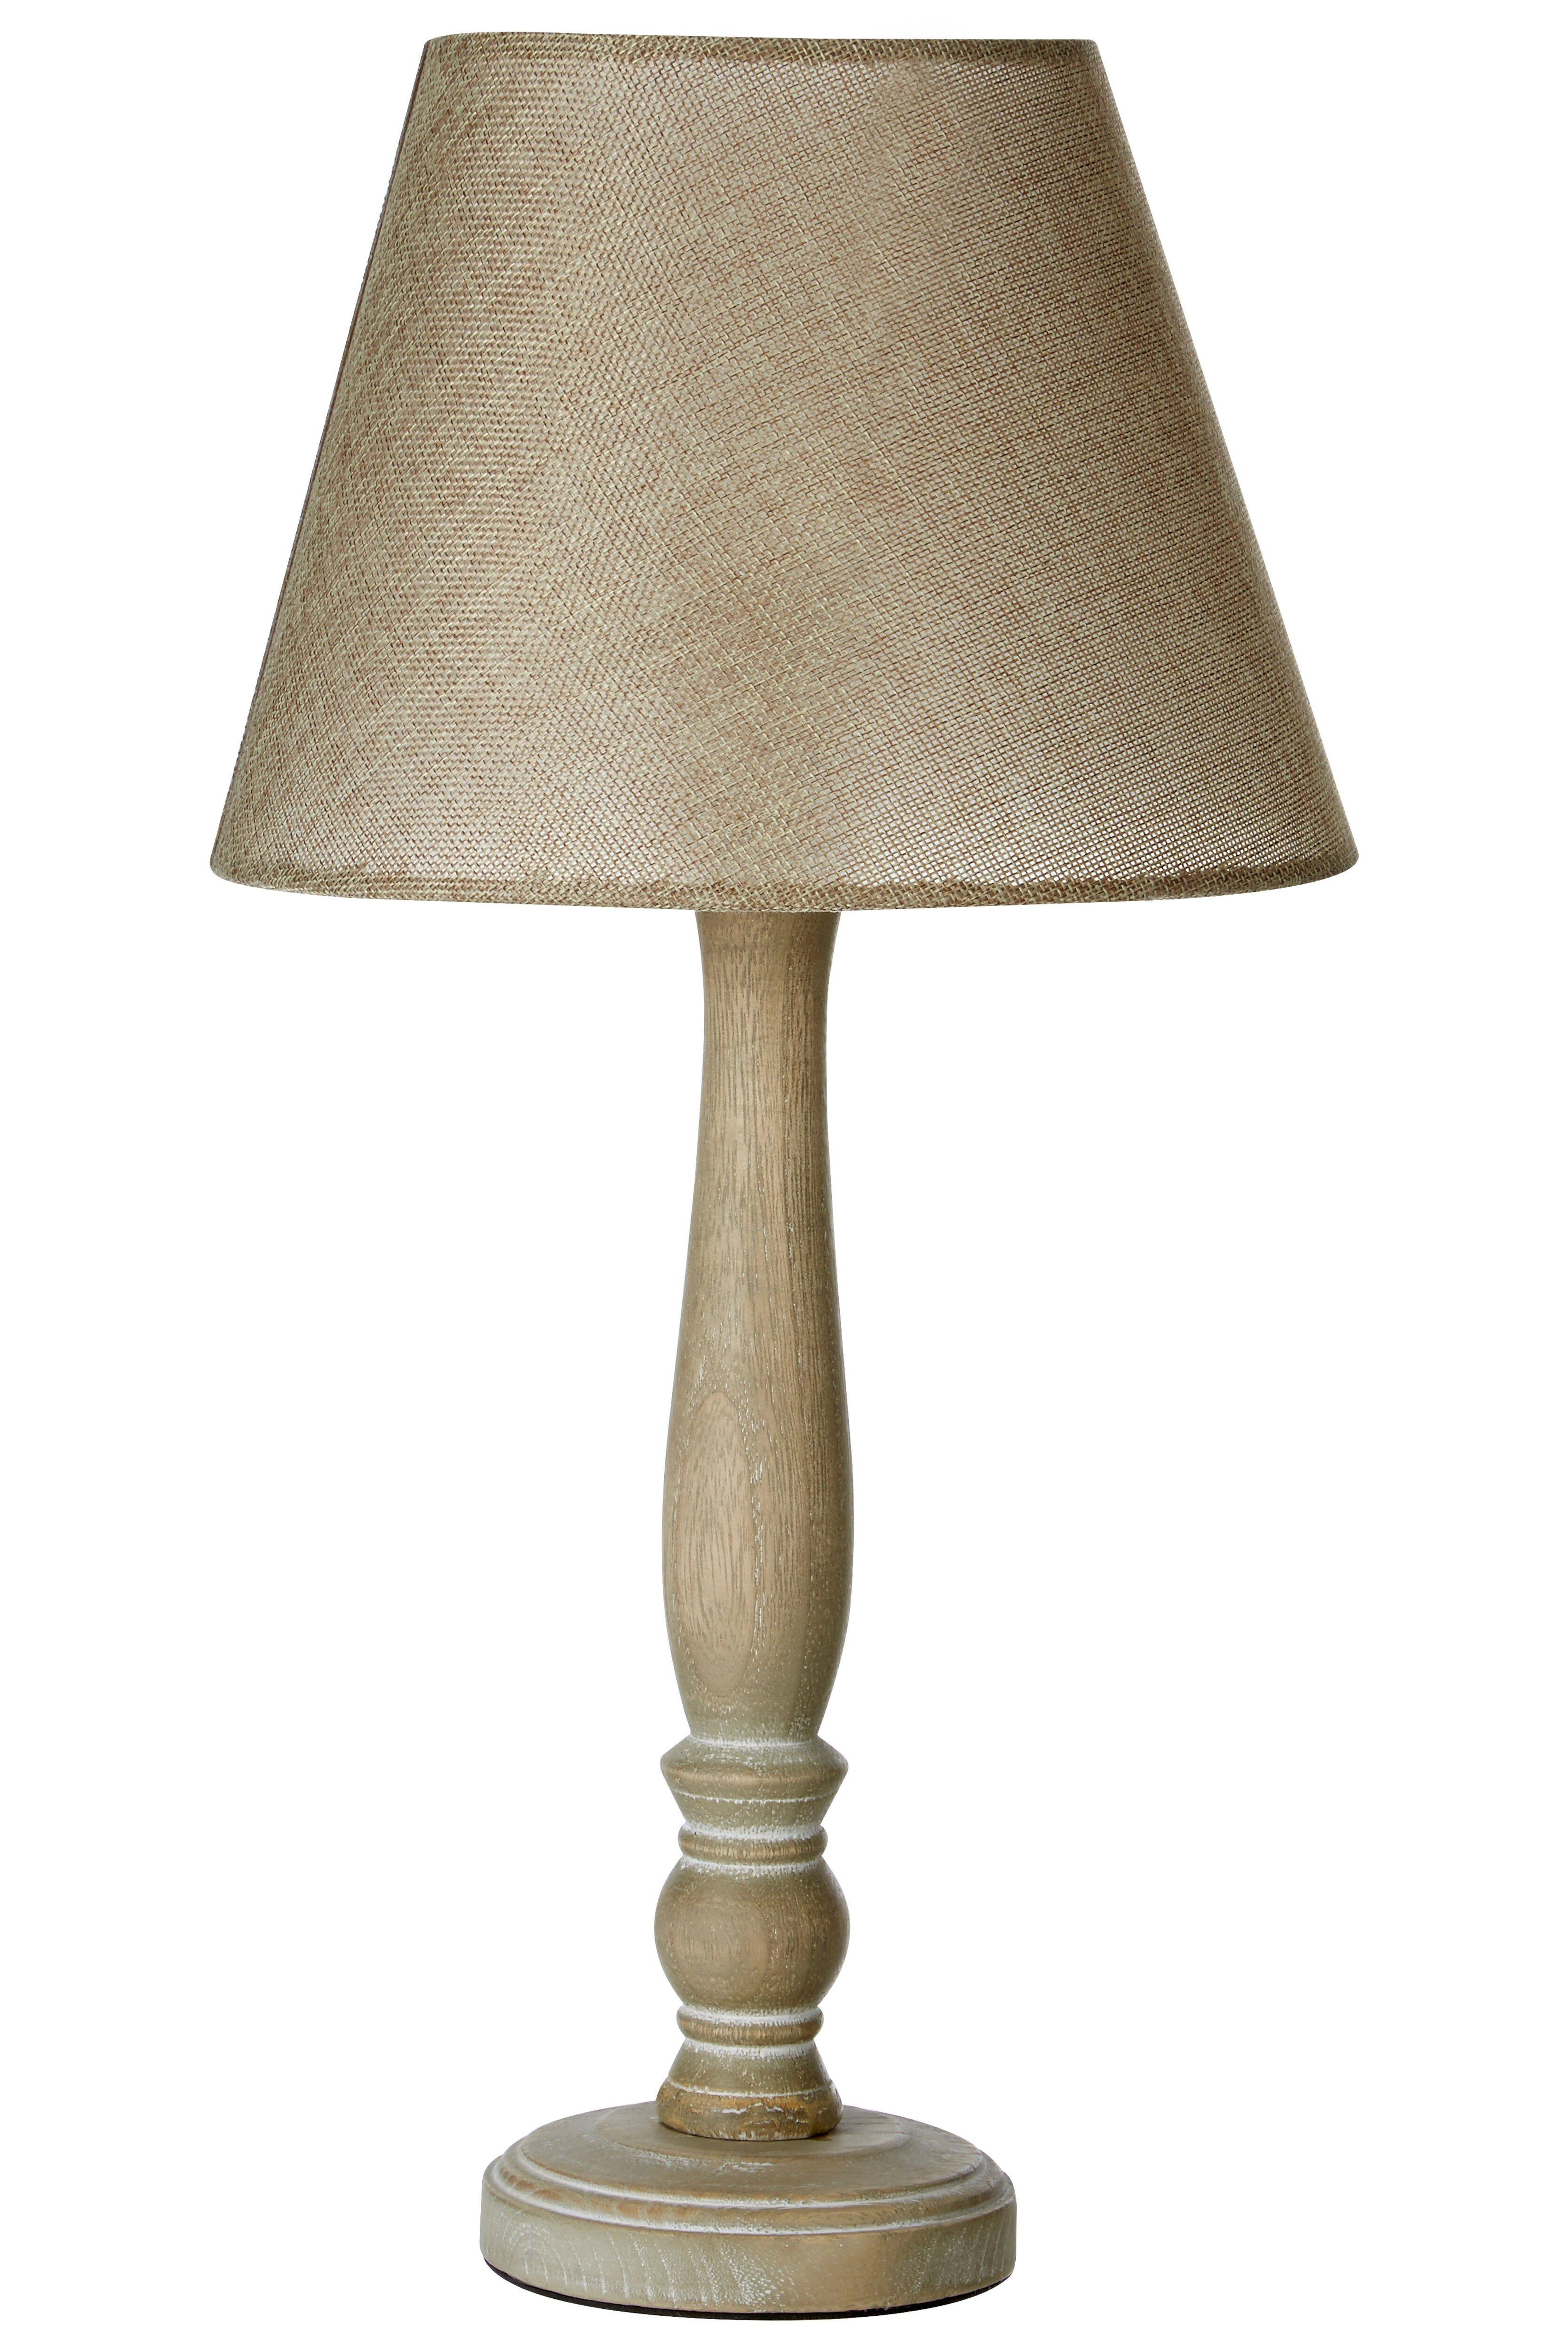 Interiors by Premier Maine Candlestick Table Lamp with Plain Rod